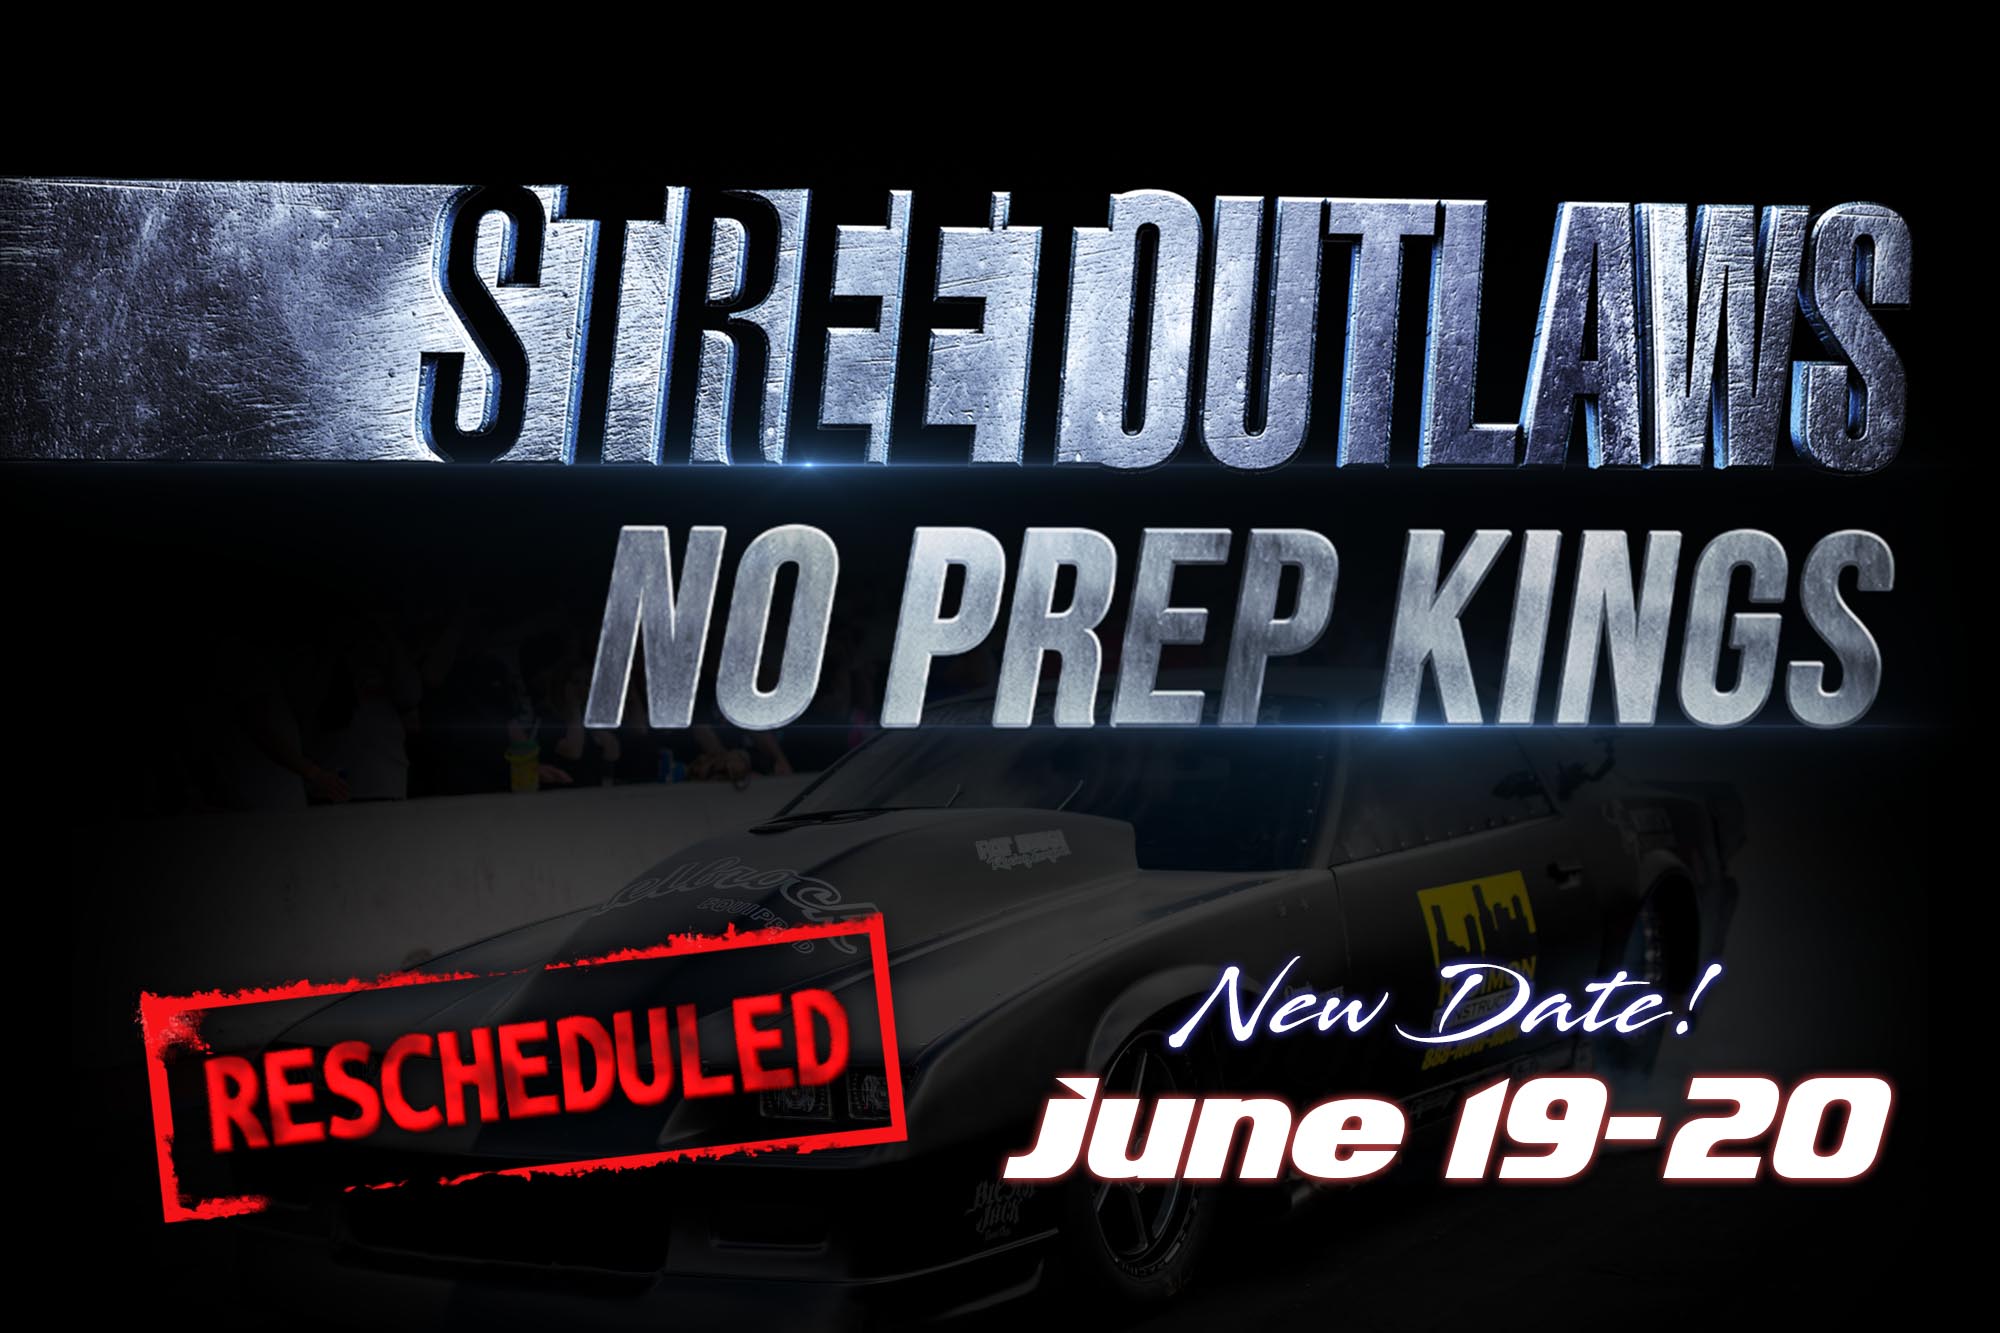 Street Outlaws: No Prep Kings Rescheduled for June 19-20 - Virginia